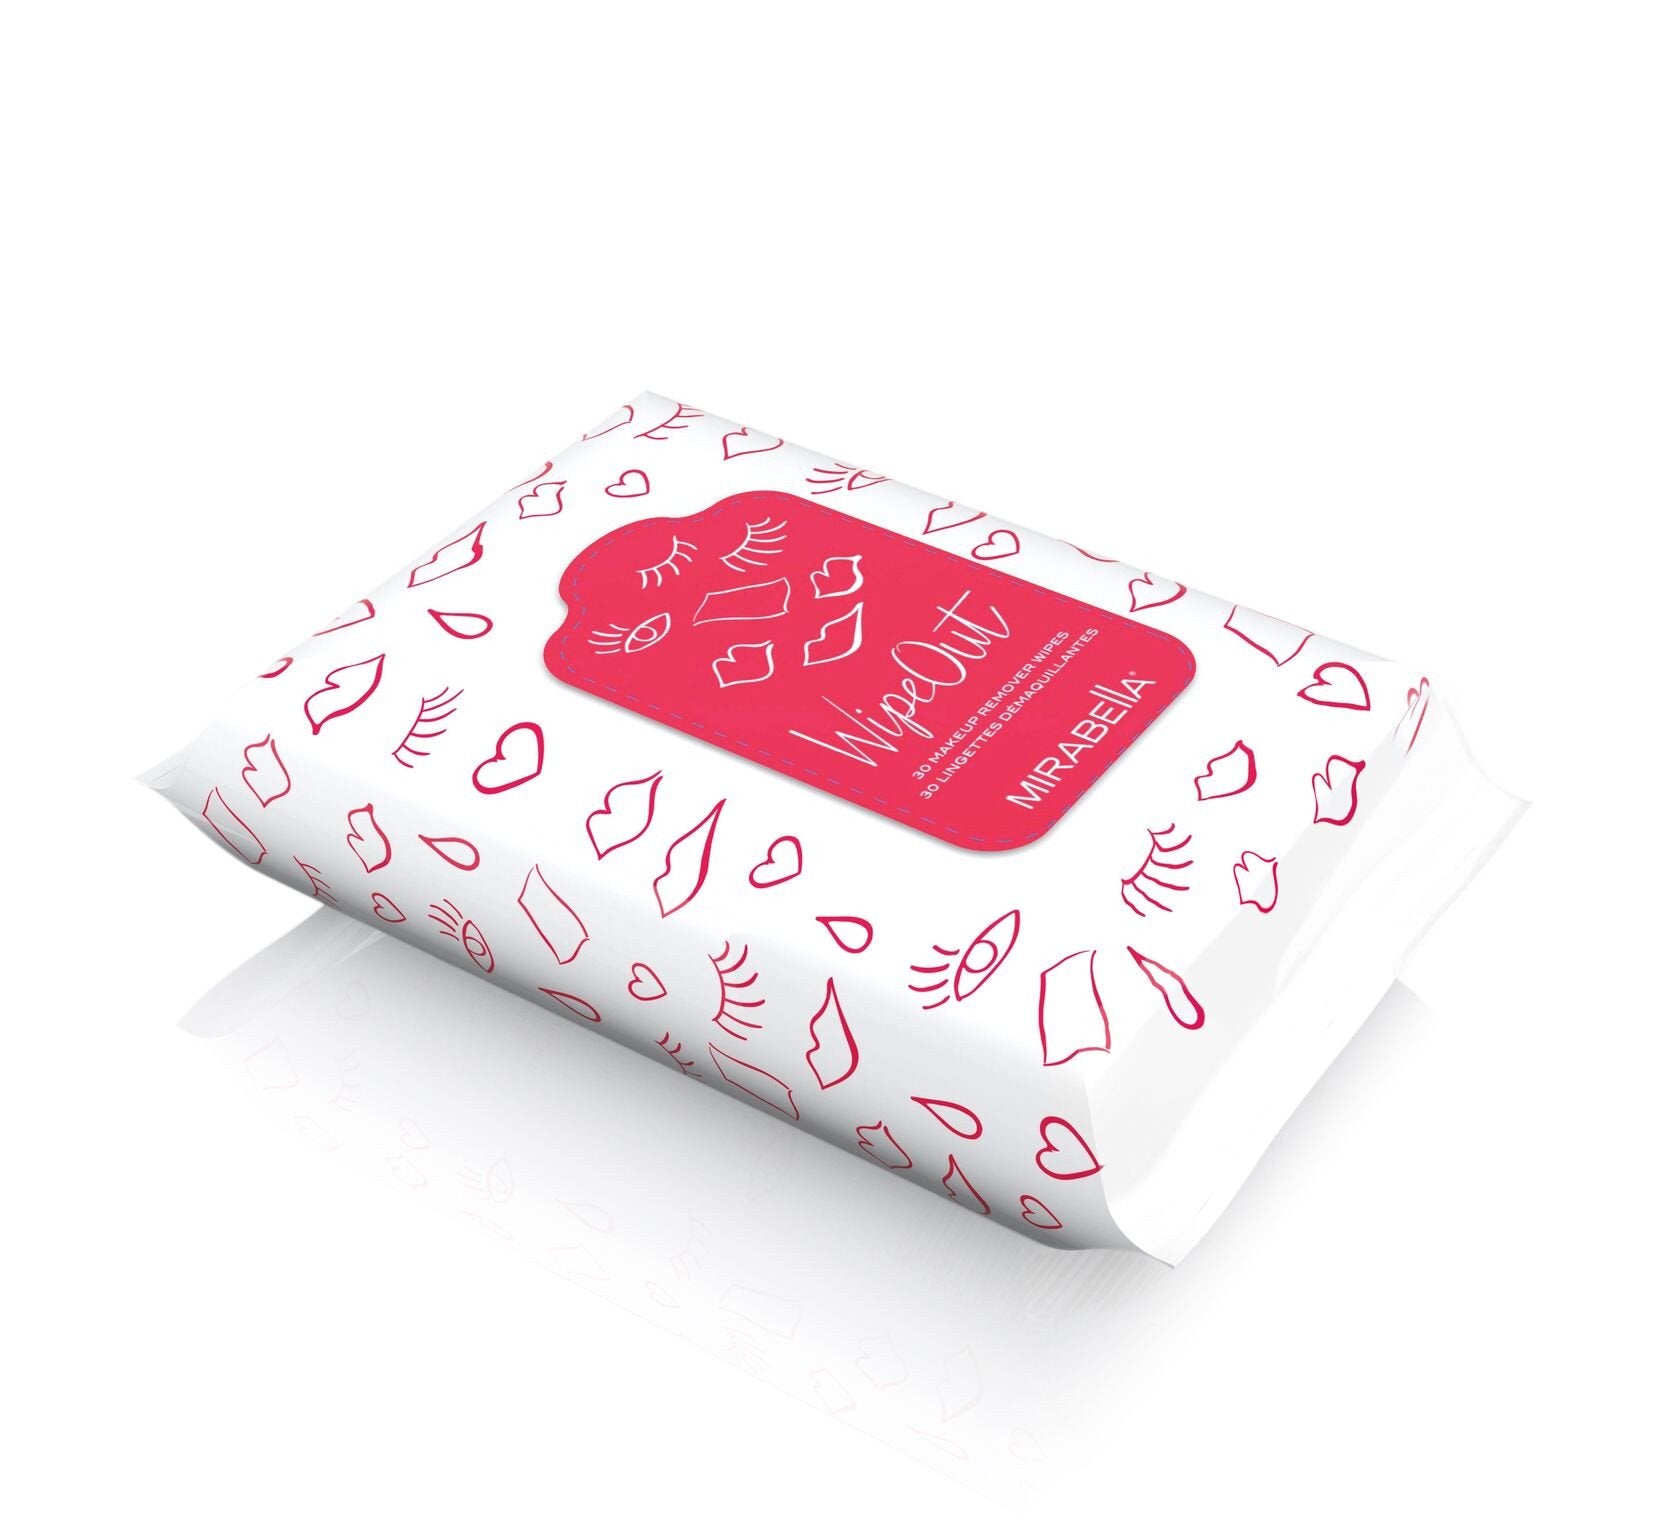 Mirabella Wipe Out Makeup Remover Wipes (30 Count) - ADDROS.COM